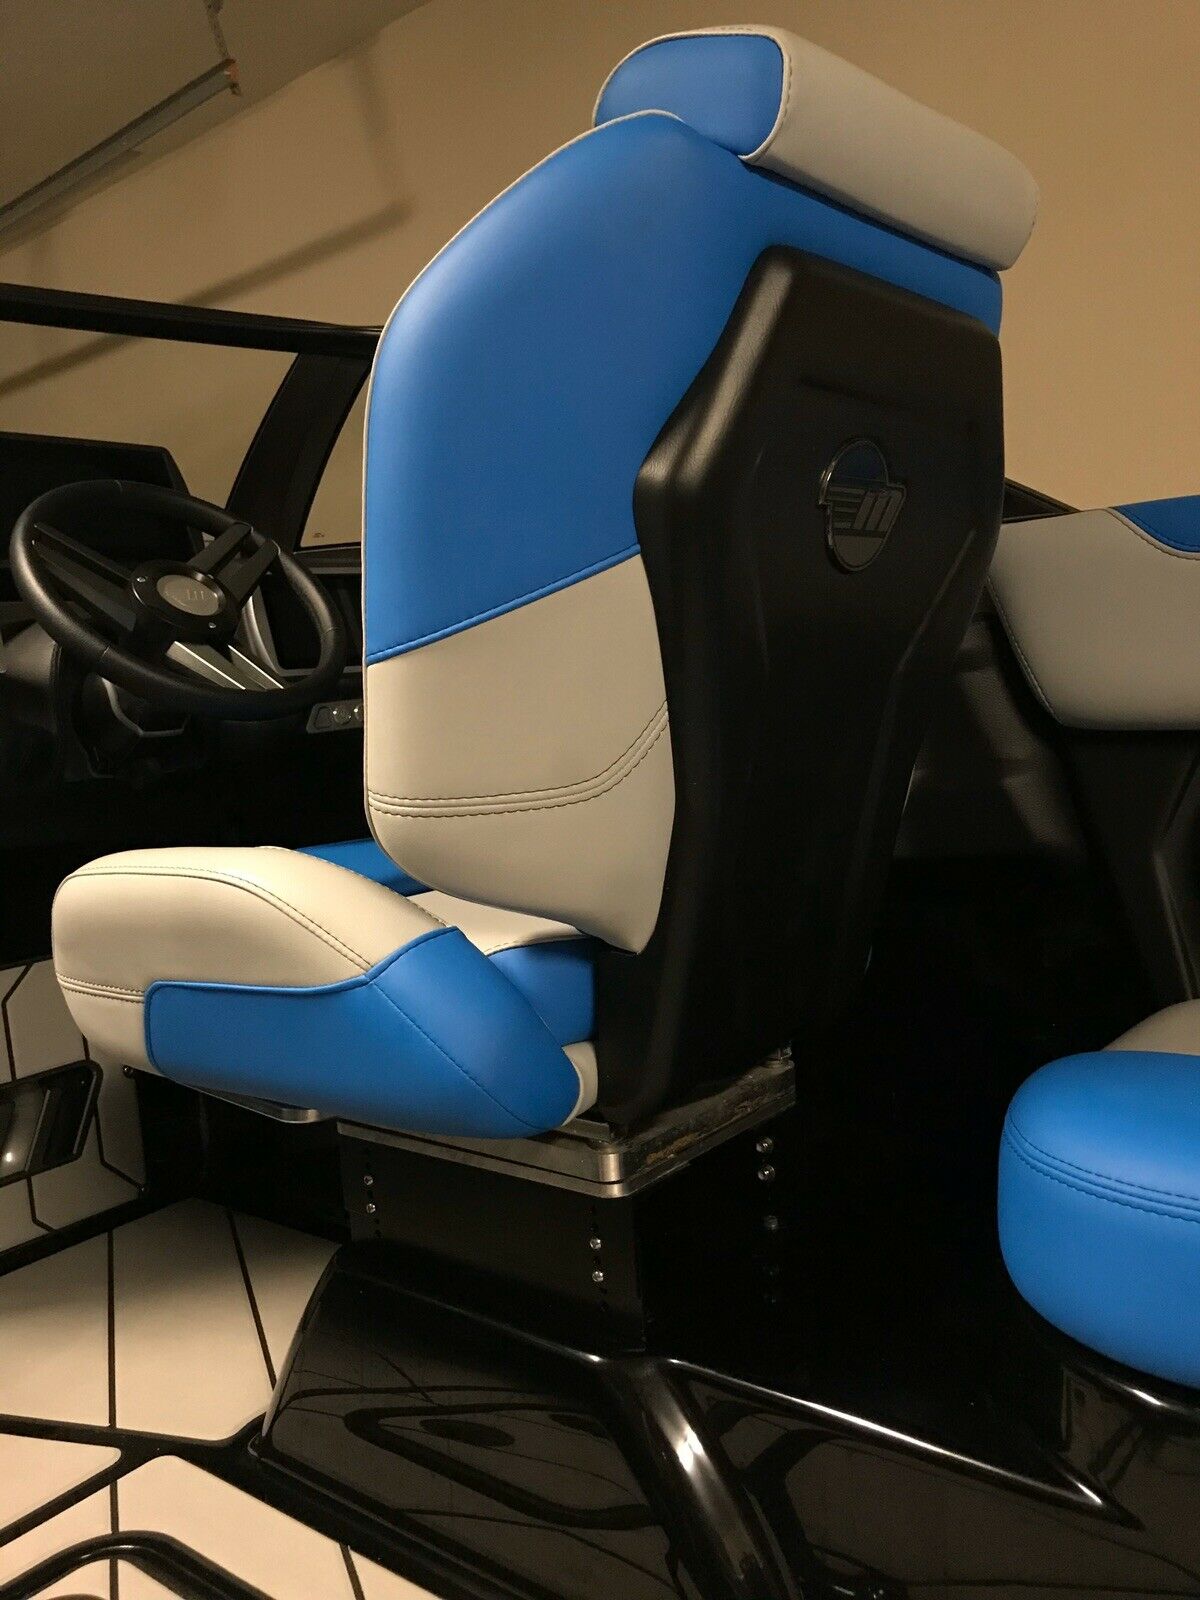 SEAT RISERS - DRIVERS SEAT - ADJUSTABLE FROM 3 3/8 TO 4 7/8 | AXIS